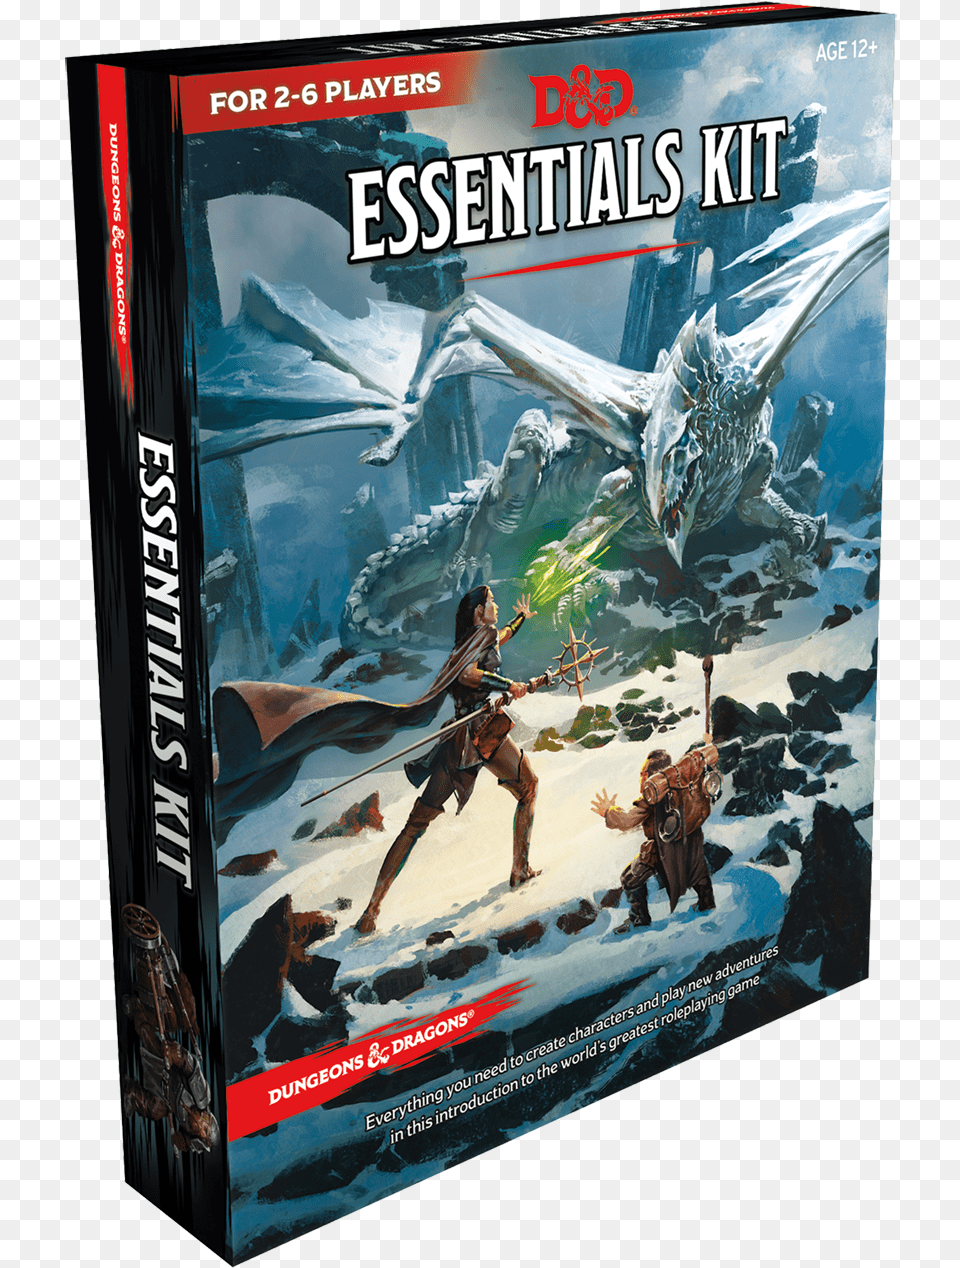 Essential Kit U2014 Welcome Home Dungeons And Dragons Essentials Kit, Book, Publication, Adult, Female Free Png Download